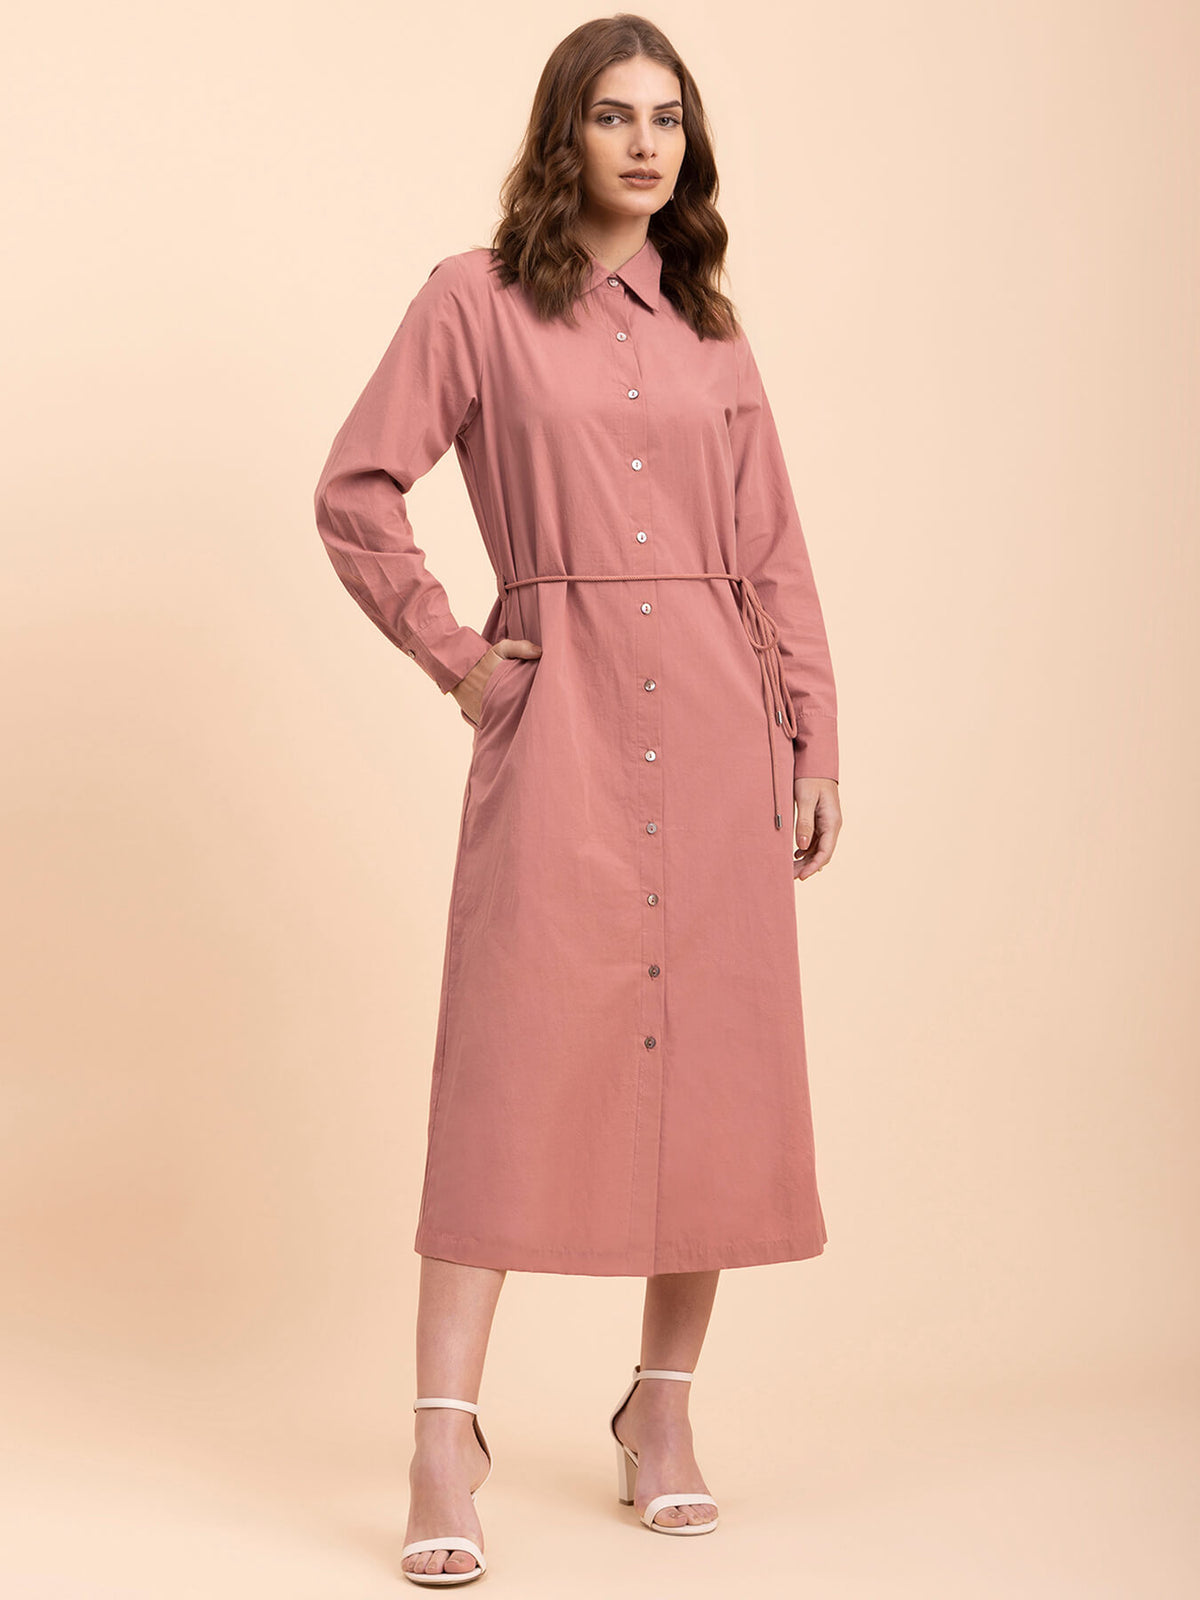 Cotton Wing Collar Dress - Dusty Pink